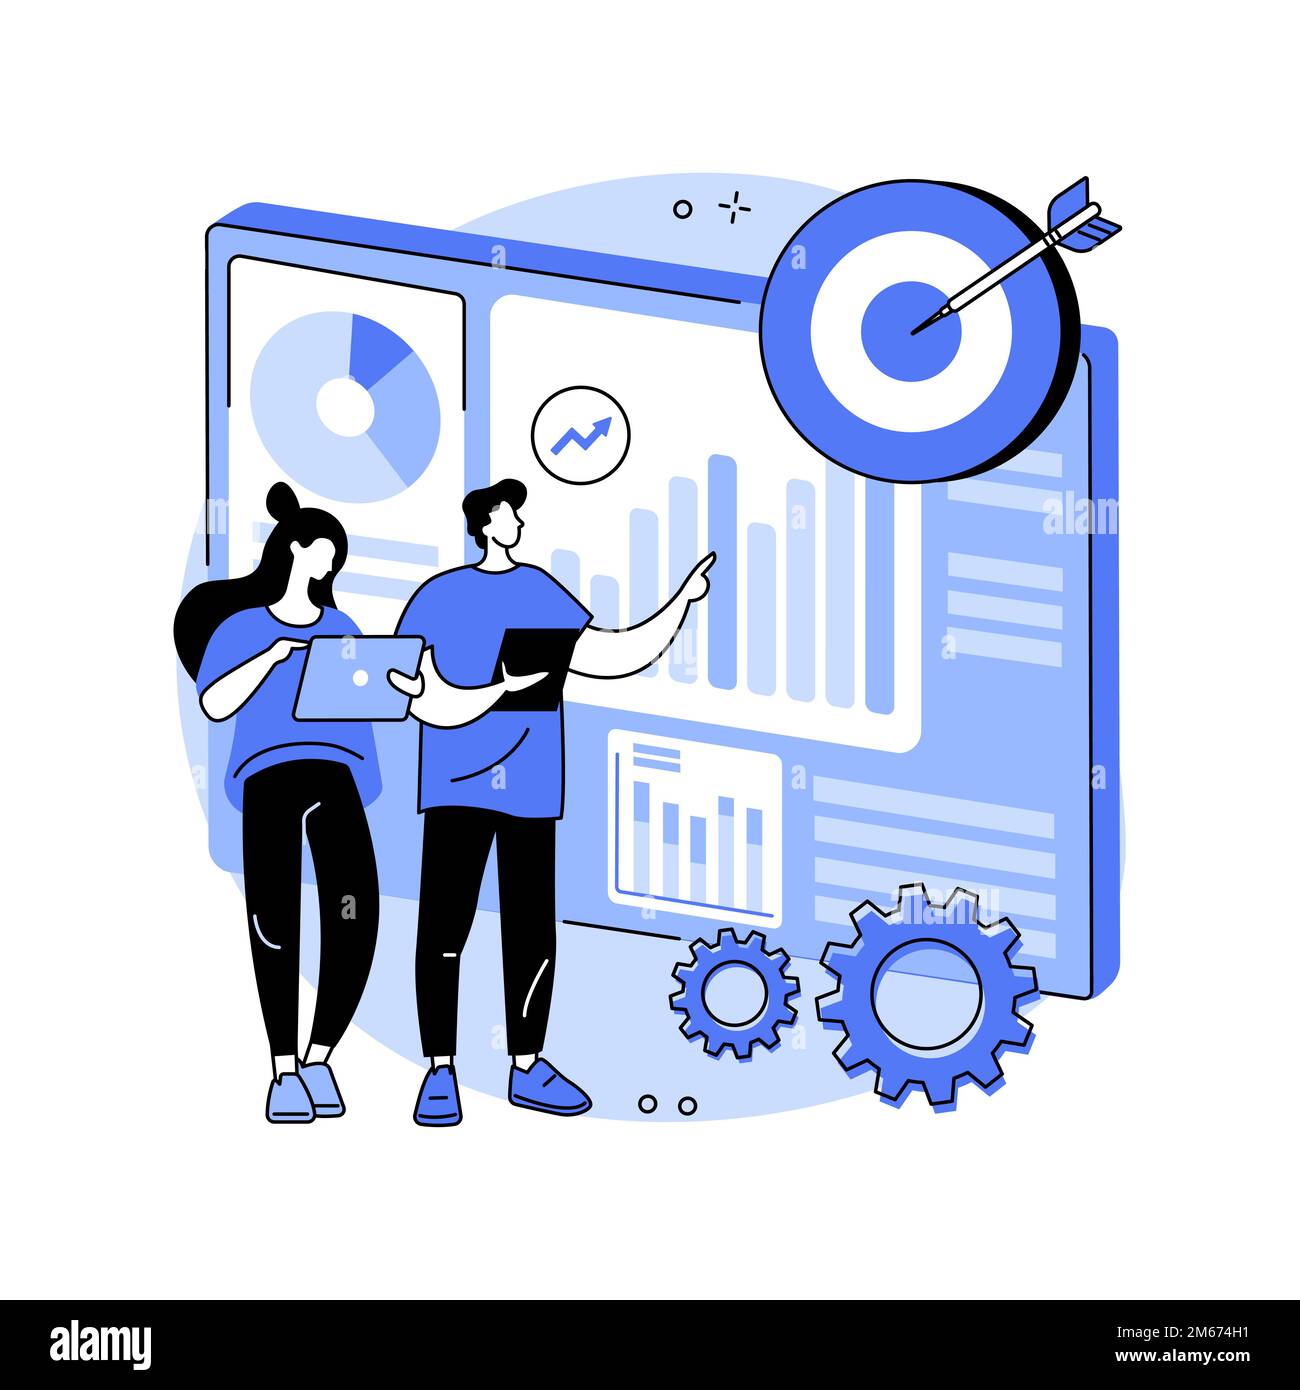 Performance management abstract concept vector illustration. Human resource discipline, HR management software, employee productivity, performance tra Stock Vector